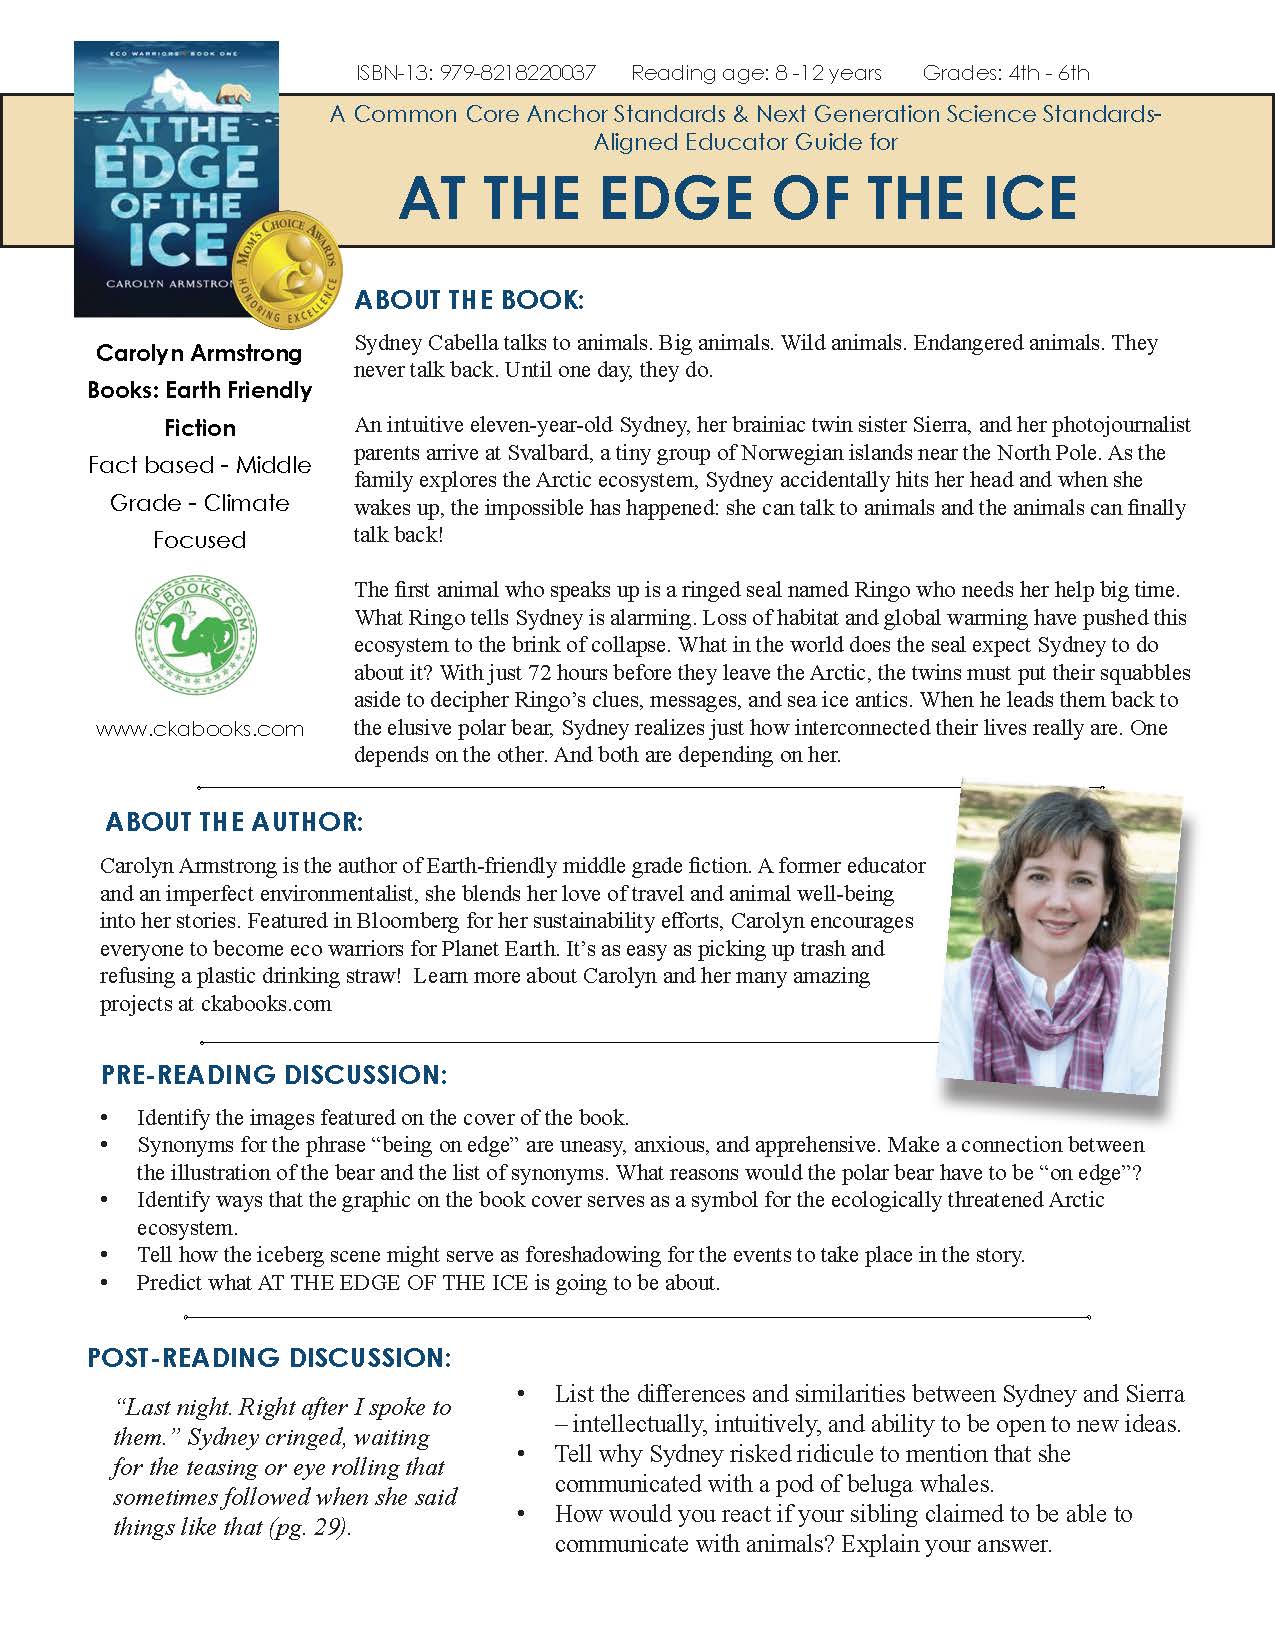 AT THE EDGE OF THE ICE By Carolyn Armstrong_Educators Guide